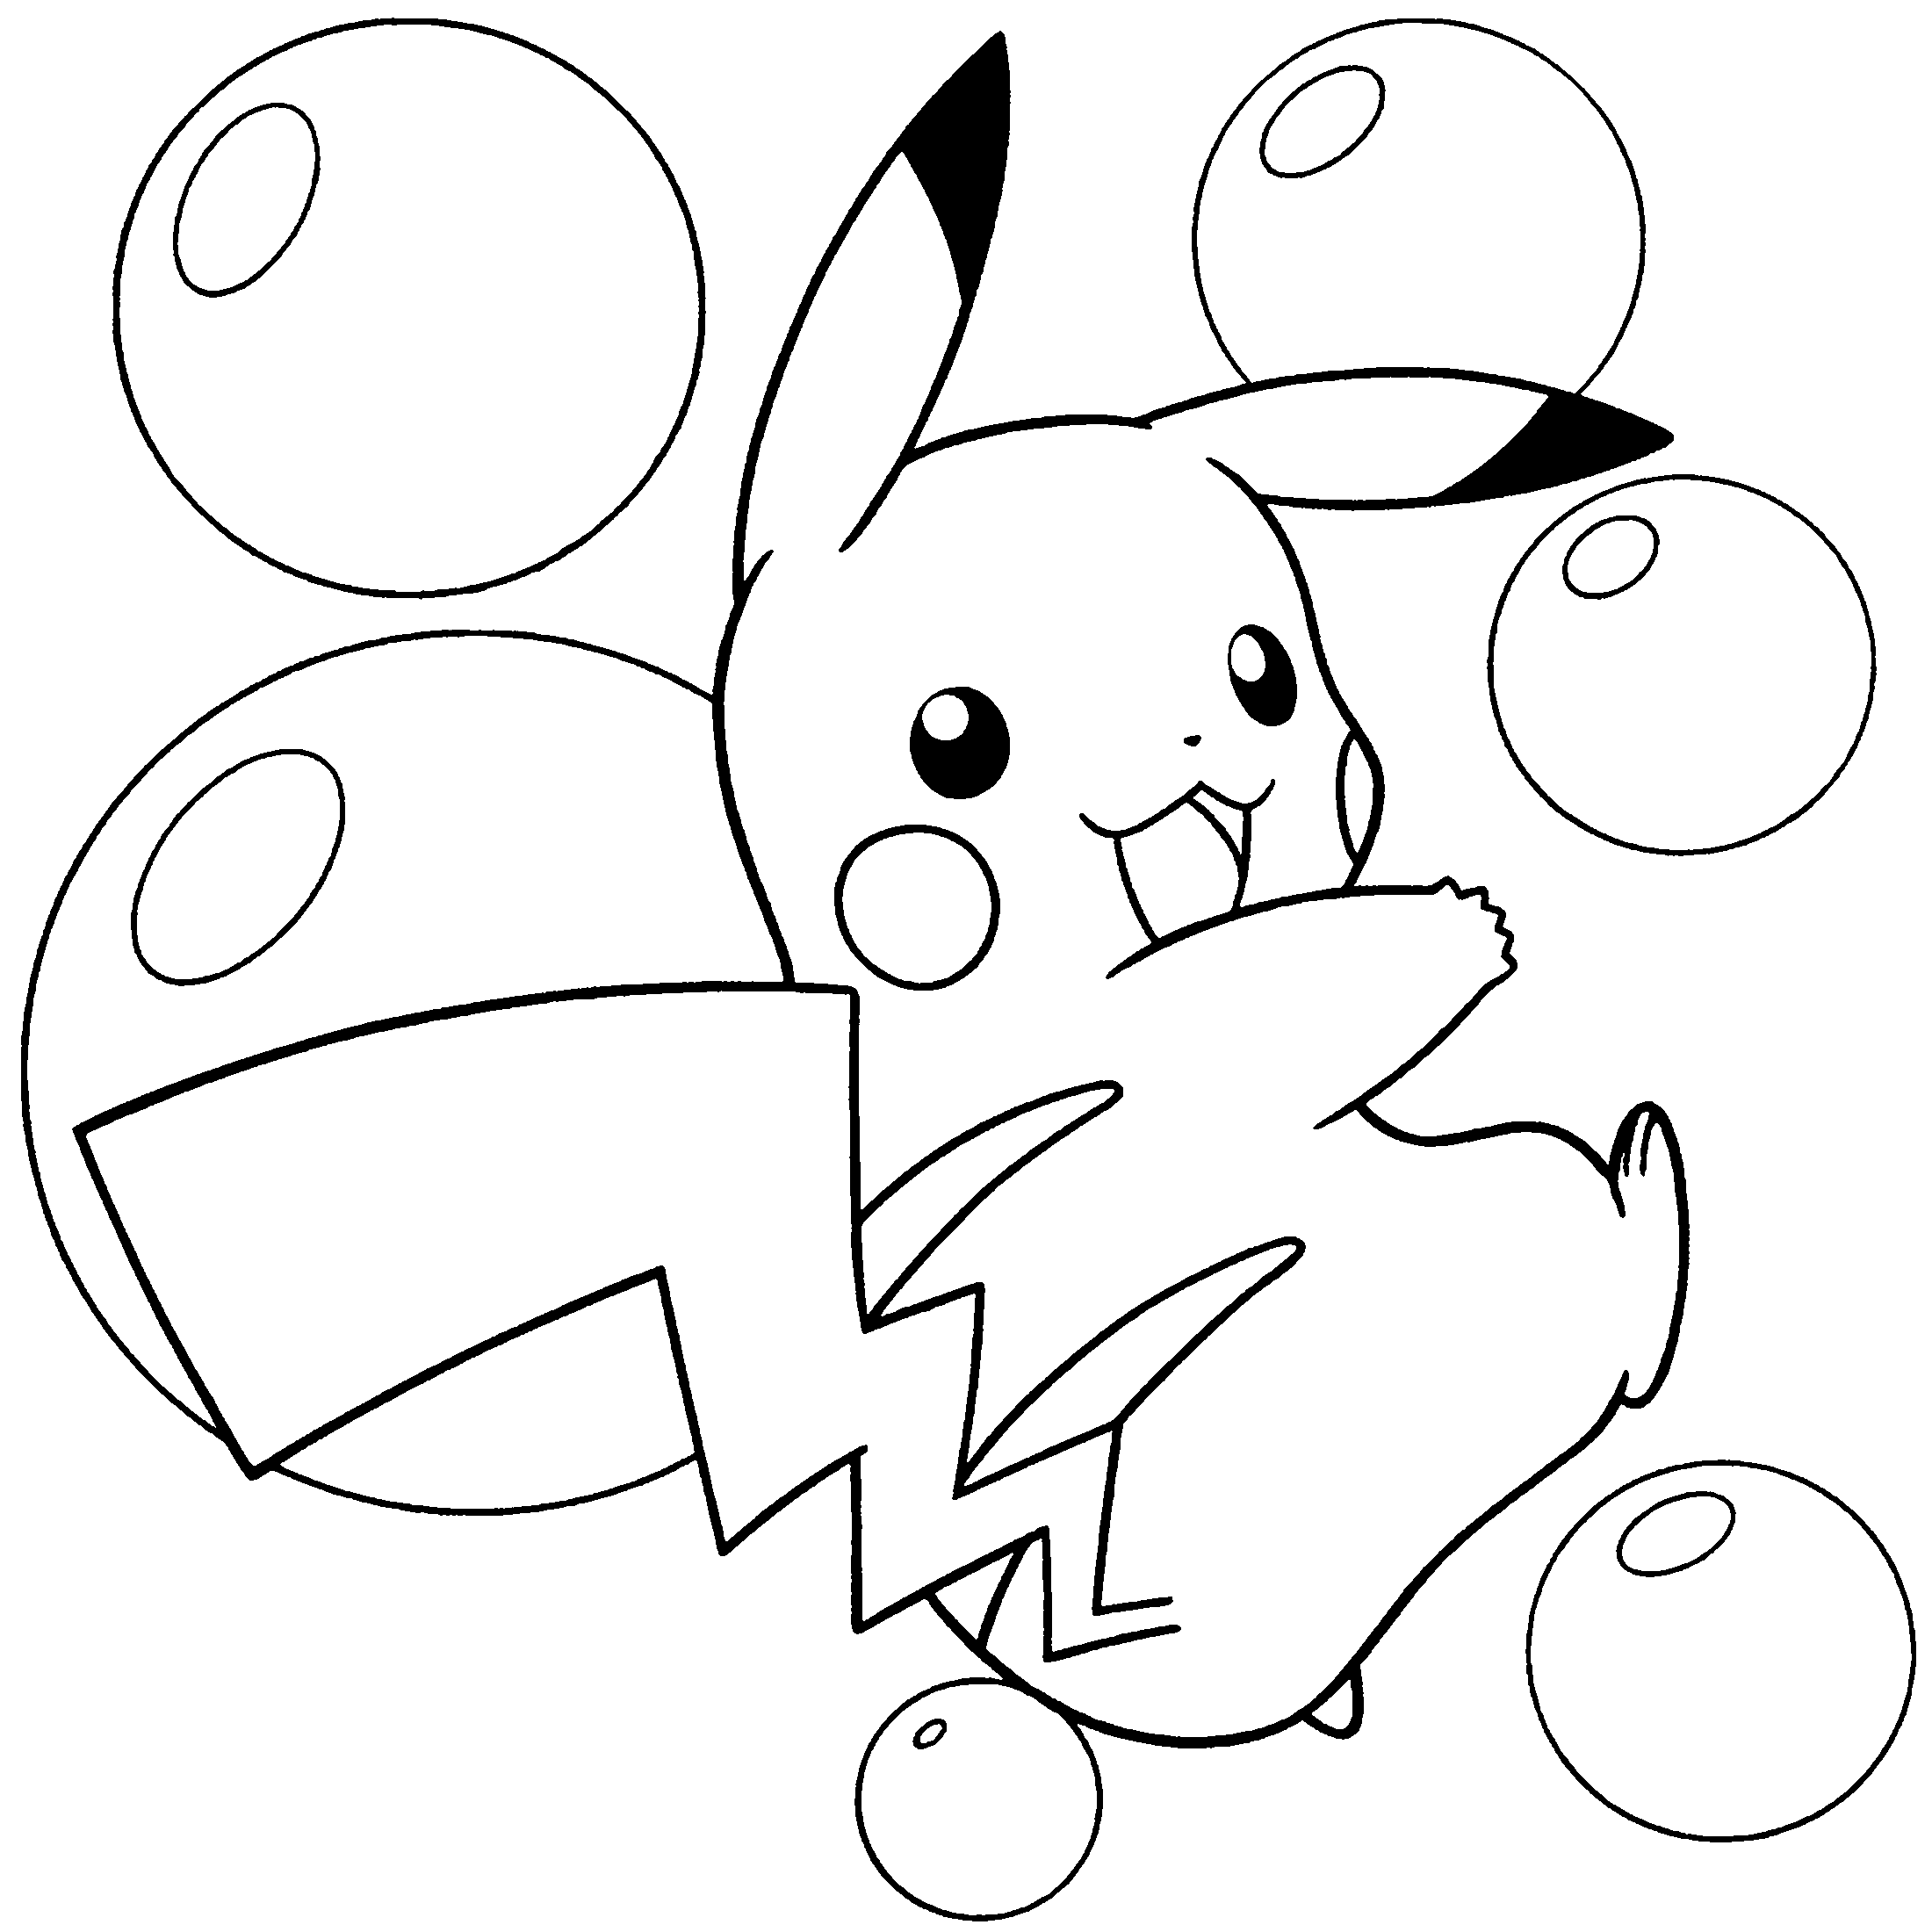  Pokemon coloring pages | Kids coloring pages | #29